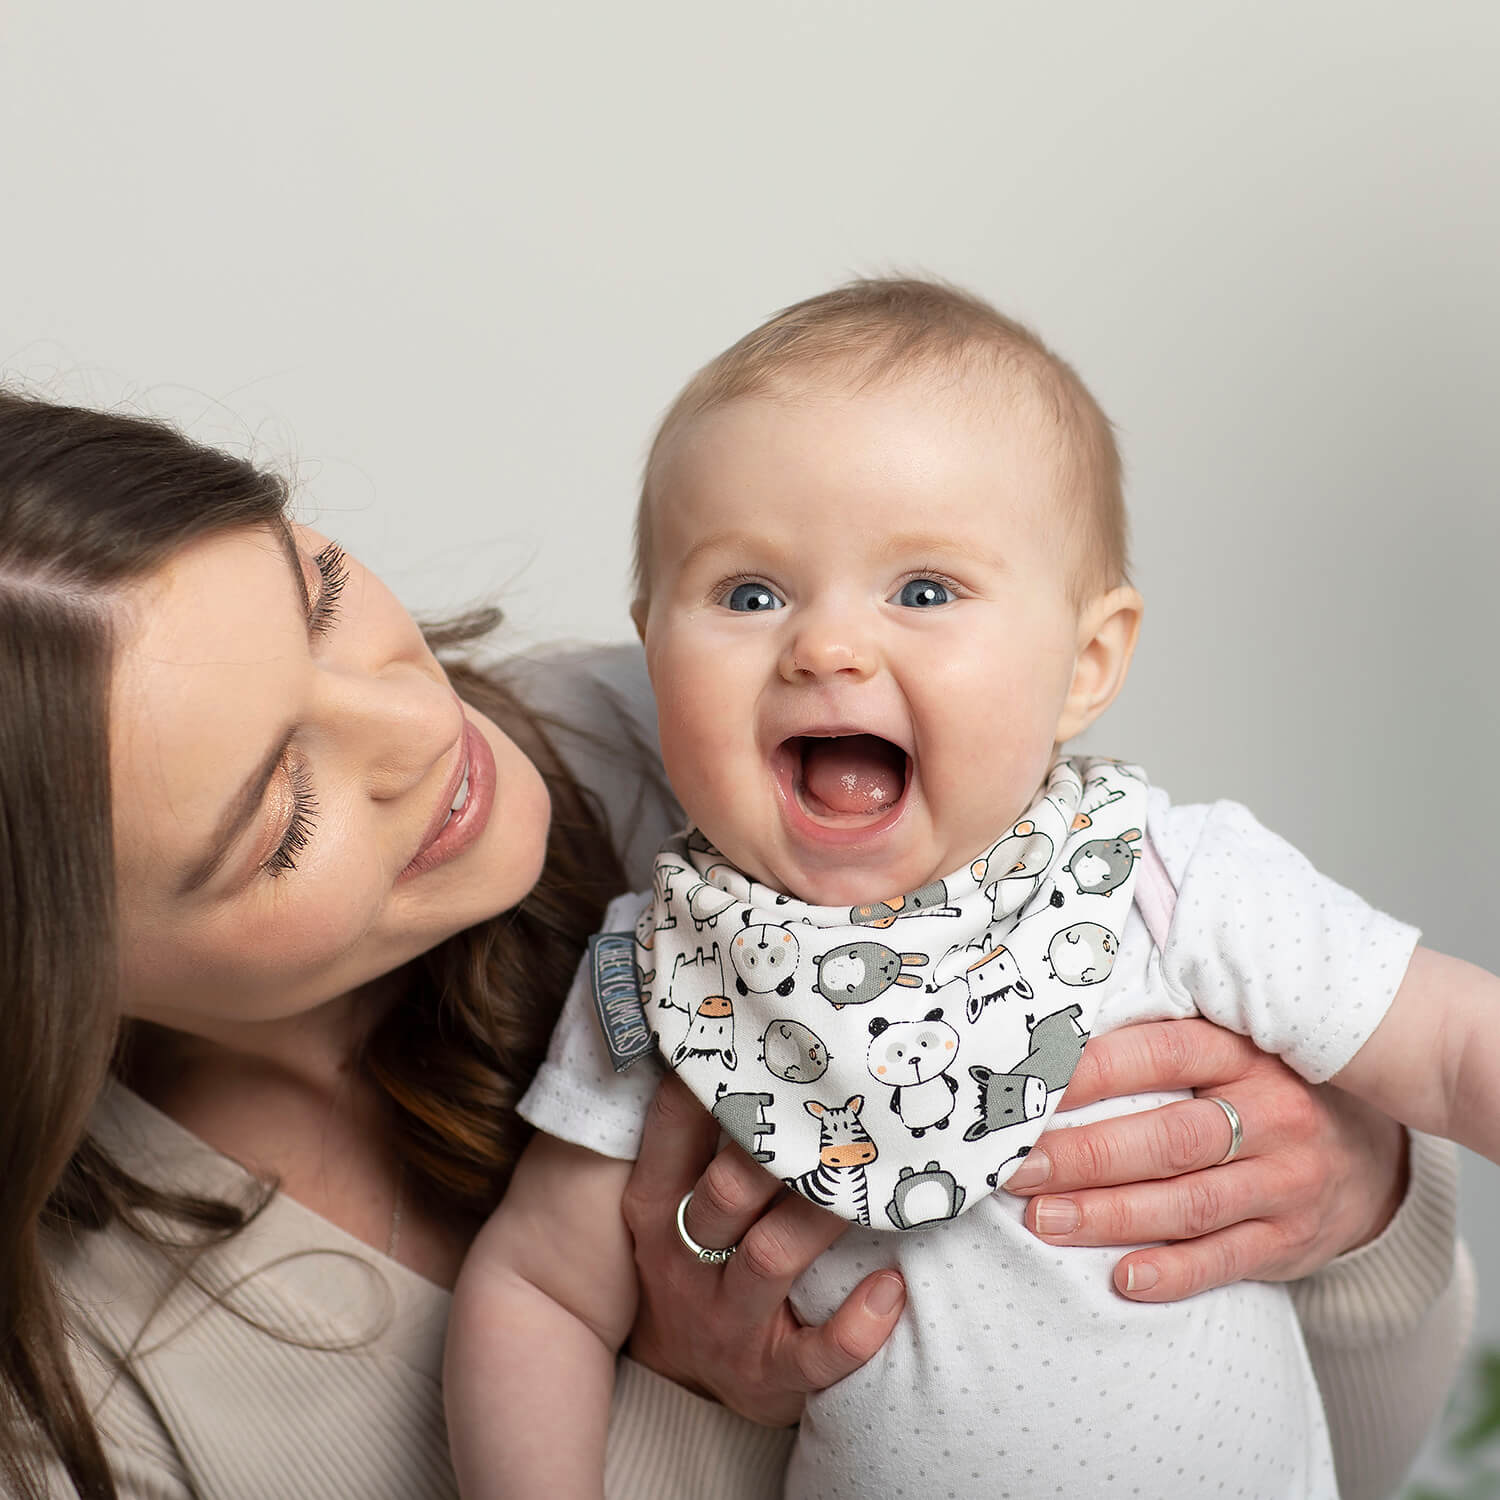 Where to Buy Cheeky Chompers Baby Products: In-Store and Online Options